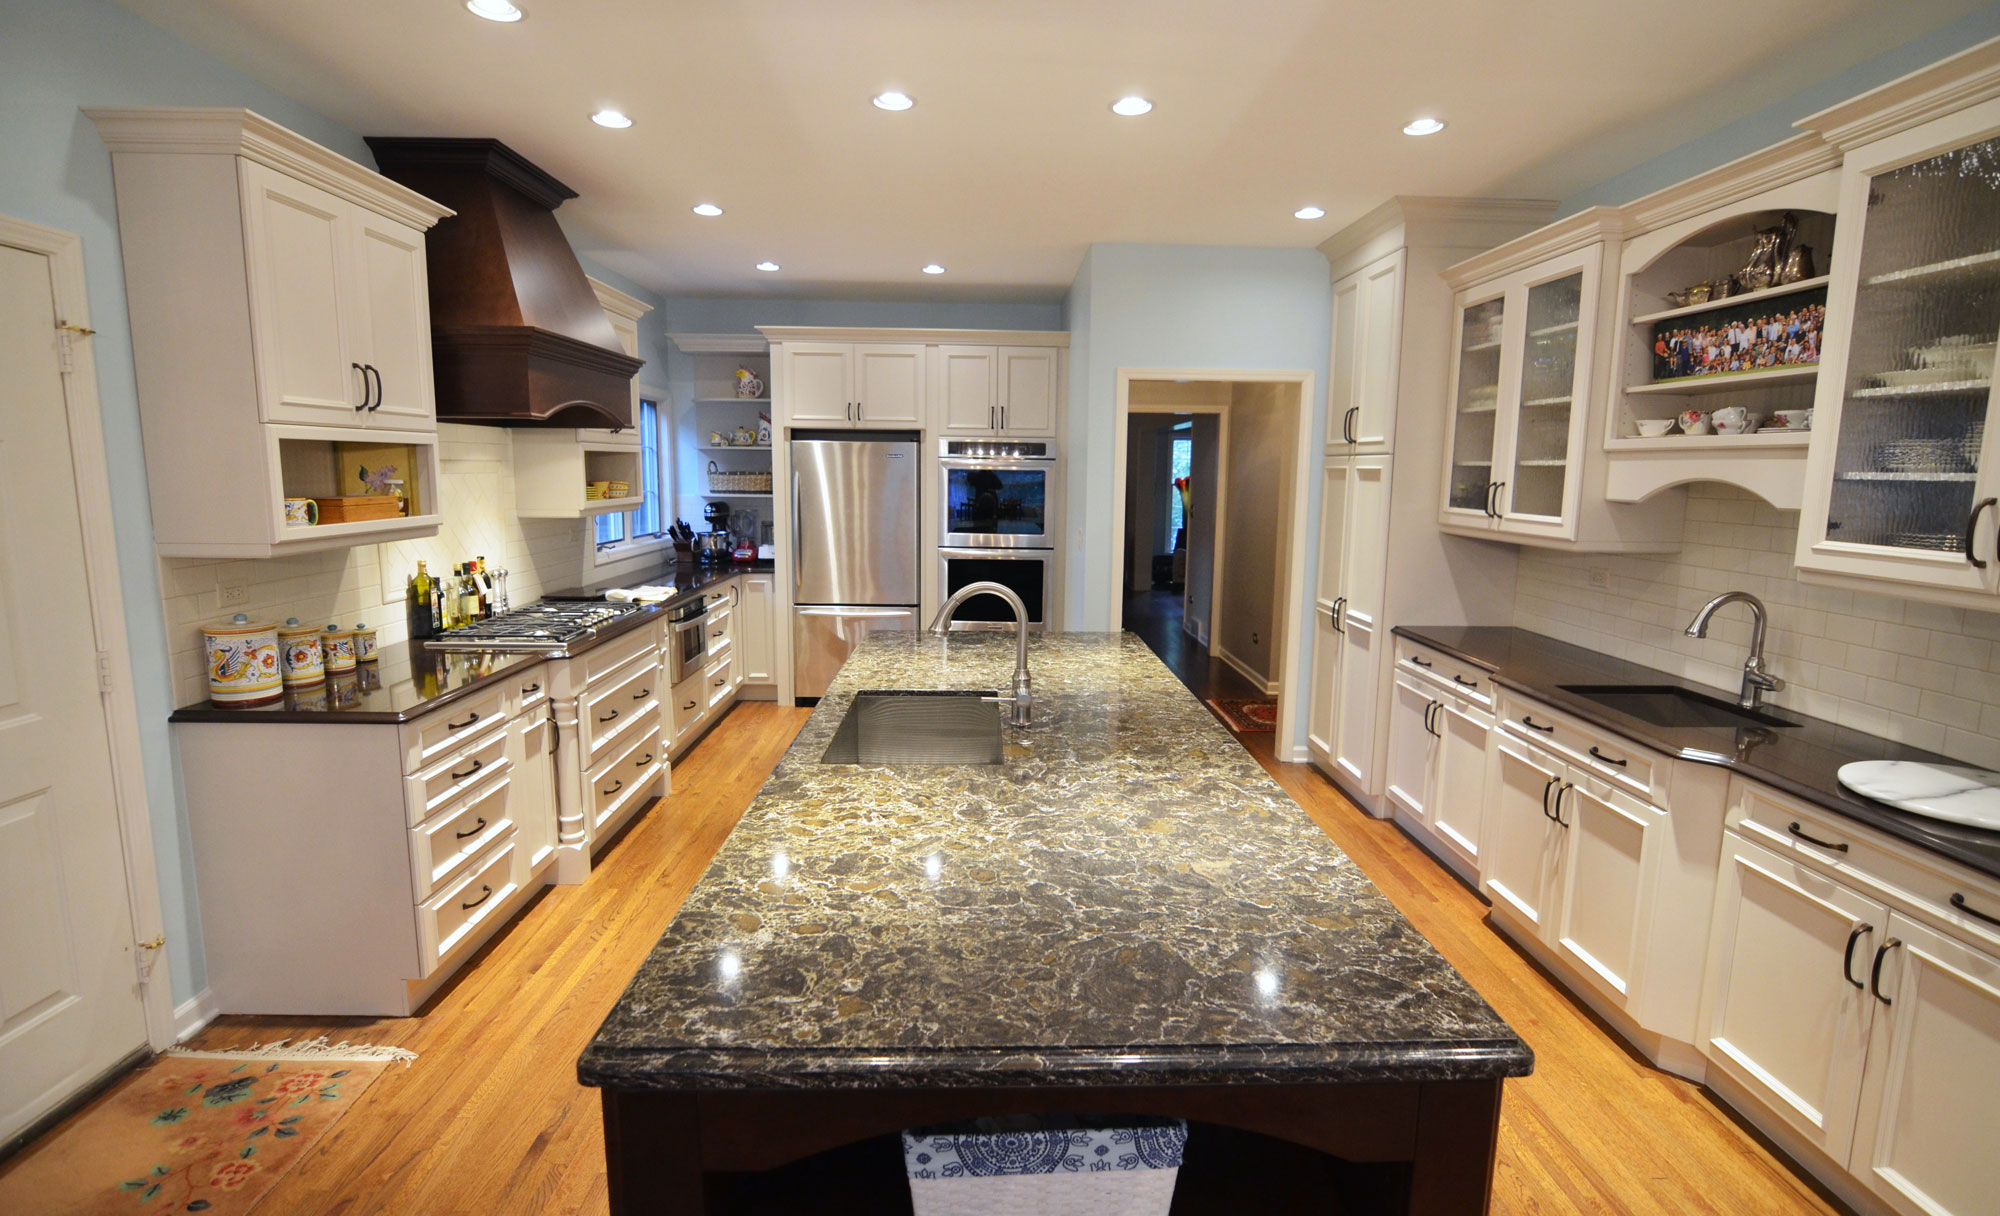 Kitchen remodeling in Naperville, IL. Home kitchen with oversized island.